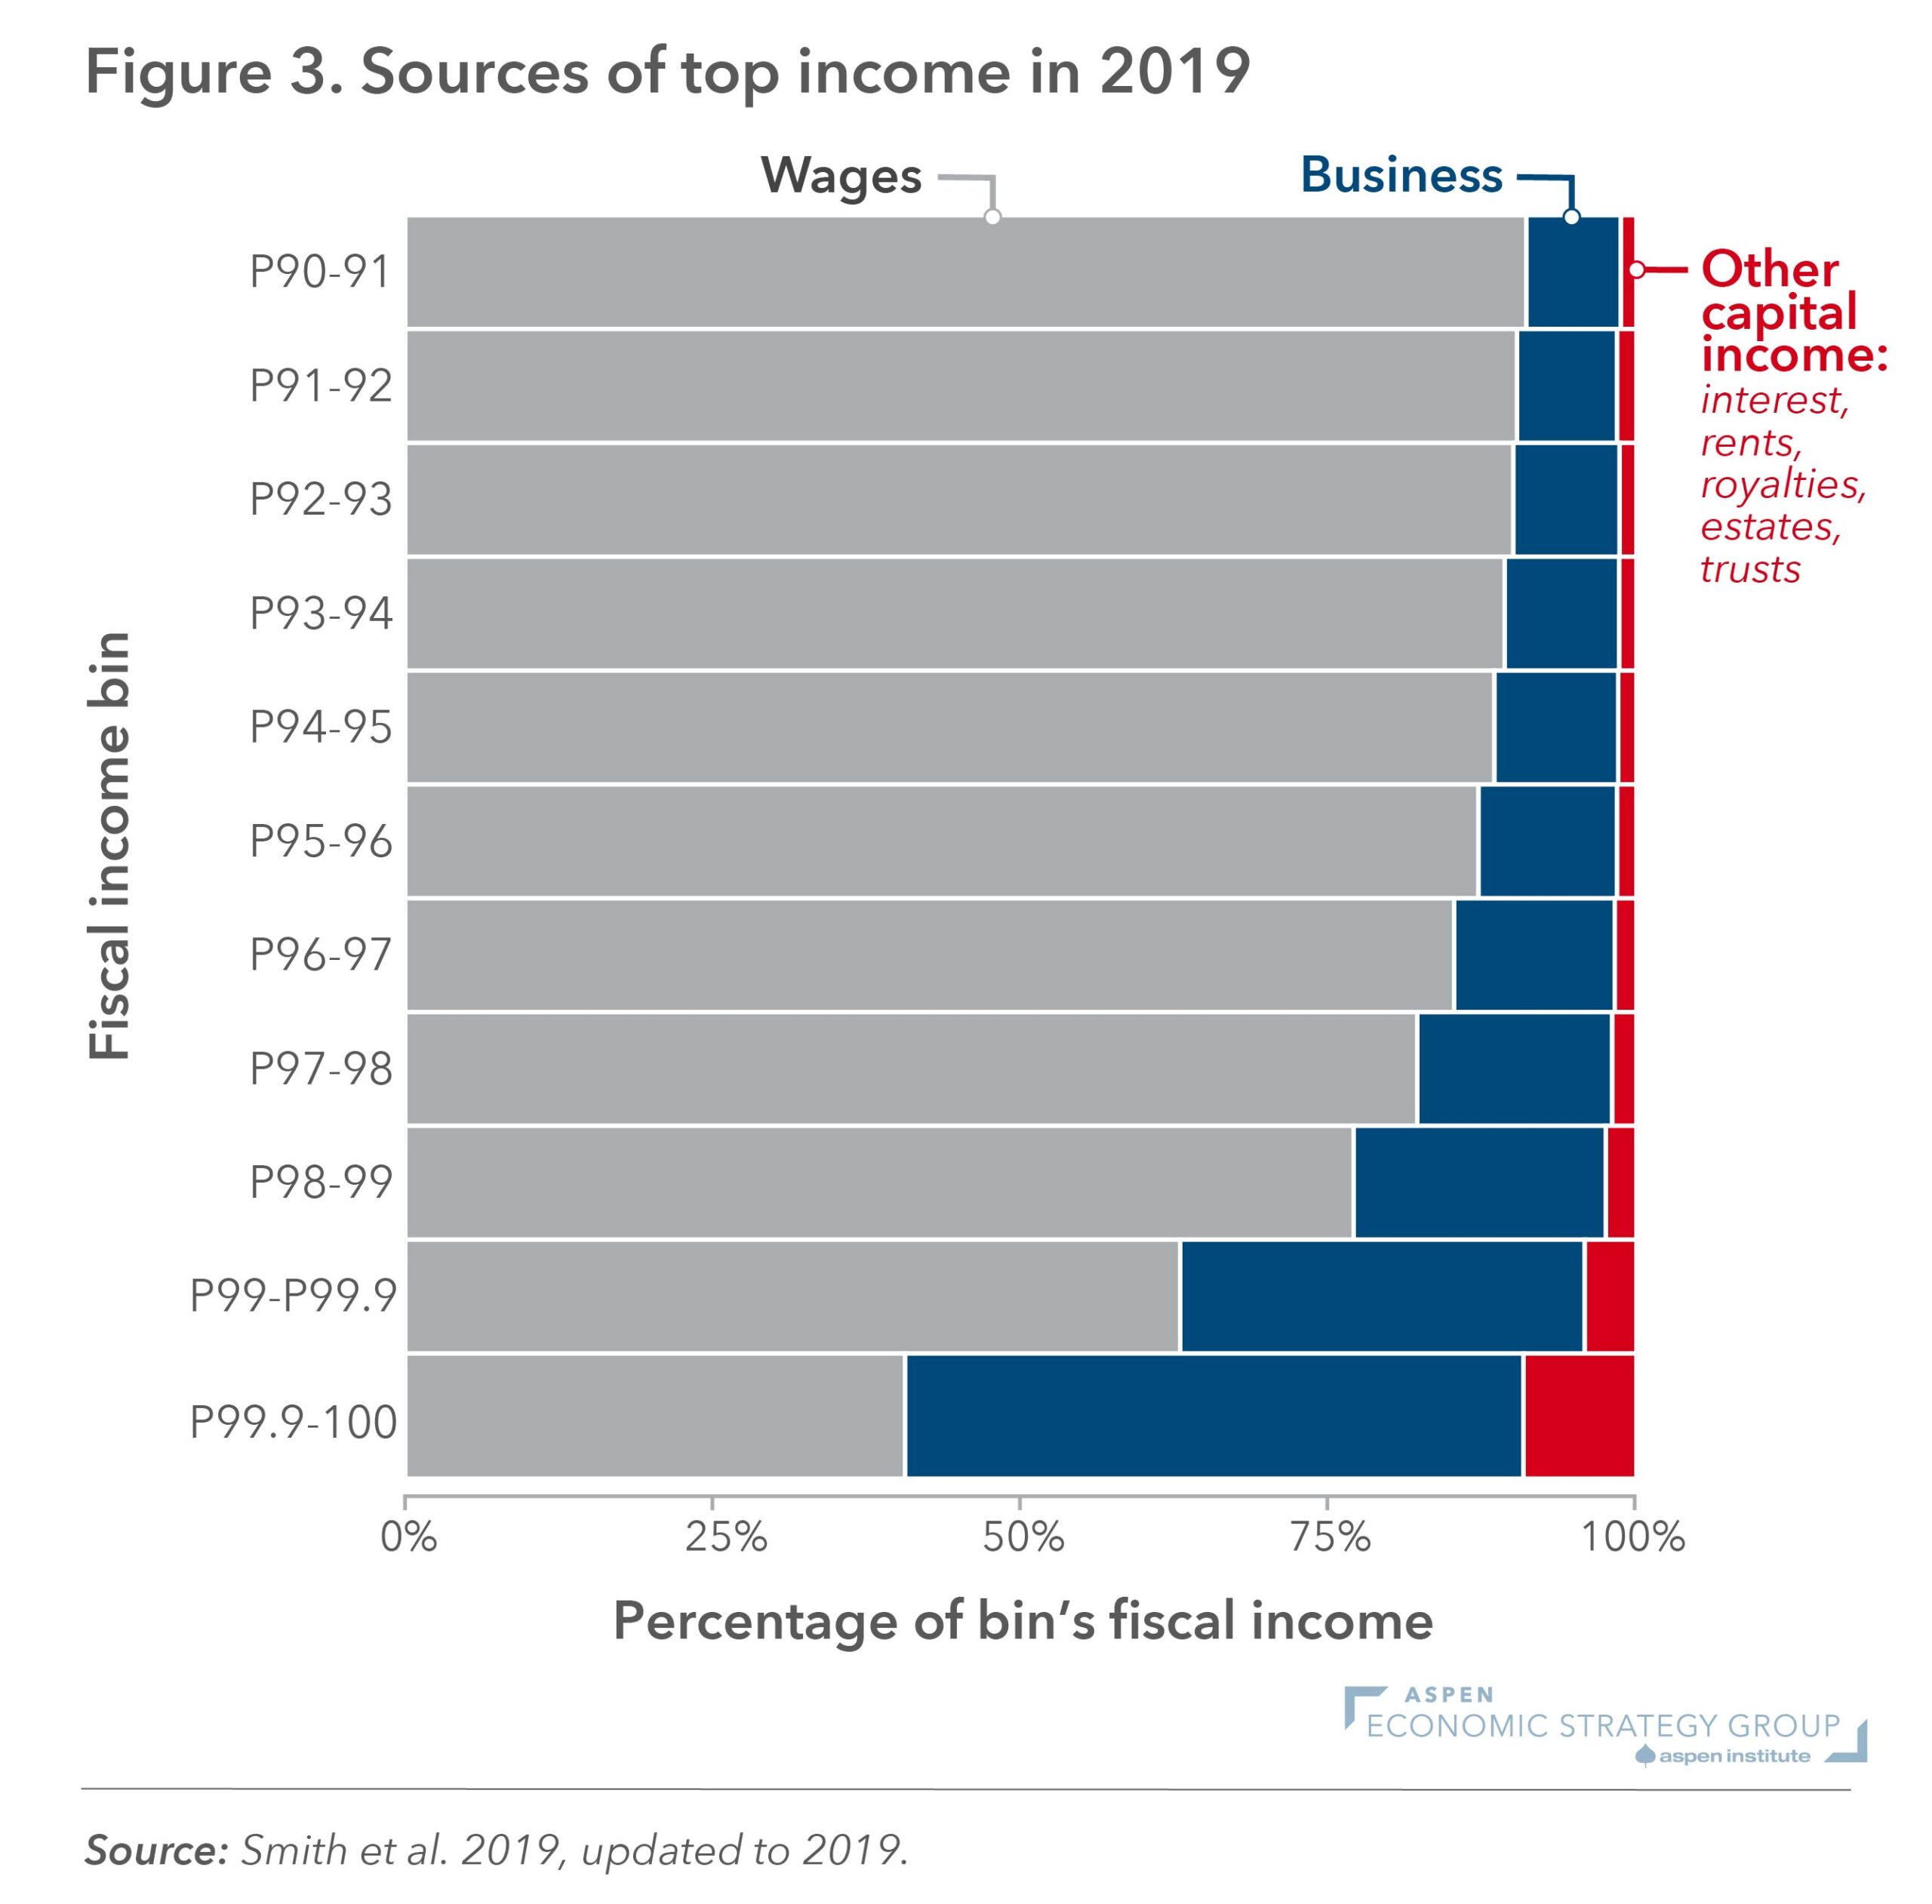 Figure 3: Top Income Sources in 2019